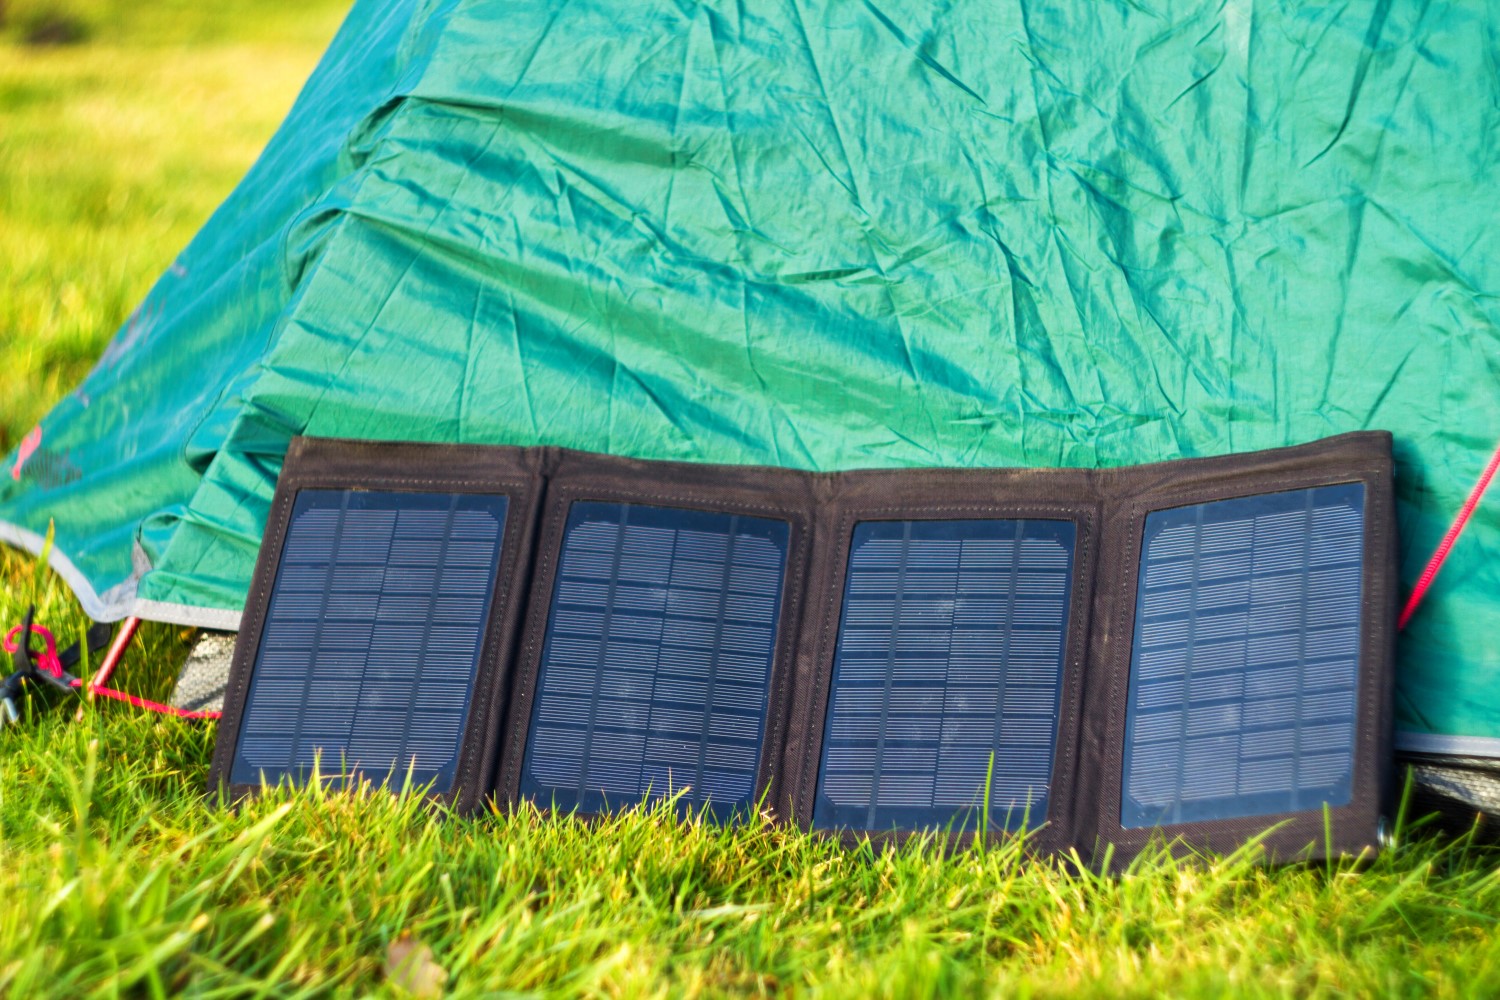 A row of small black solar panels leaning against the side of a green tent